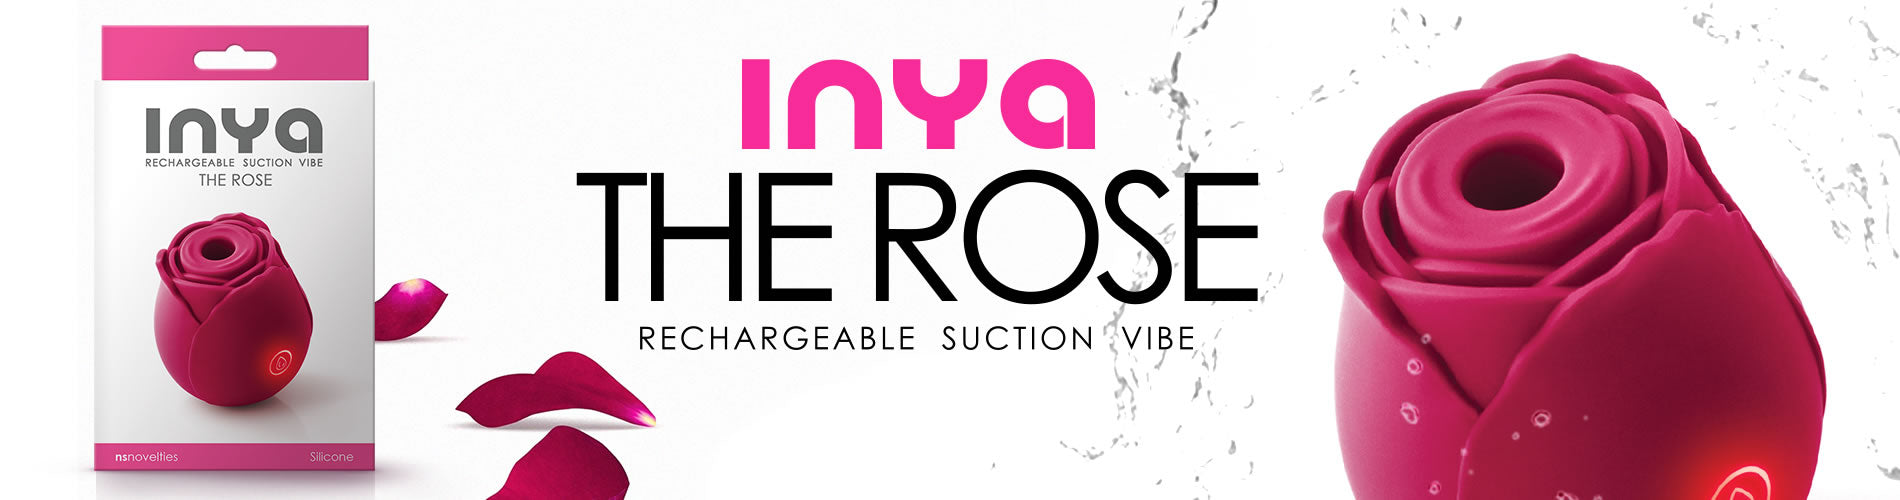 Inya The Rose Rechargeable Suction Vibrator